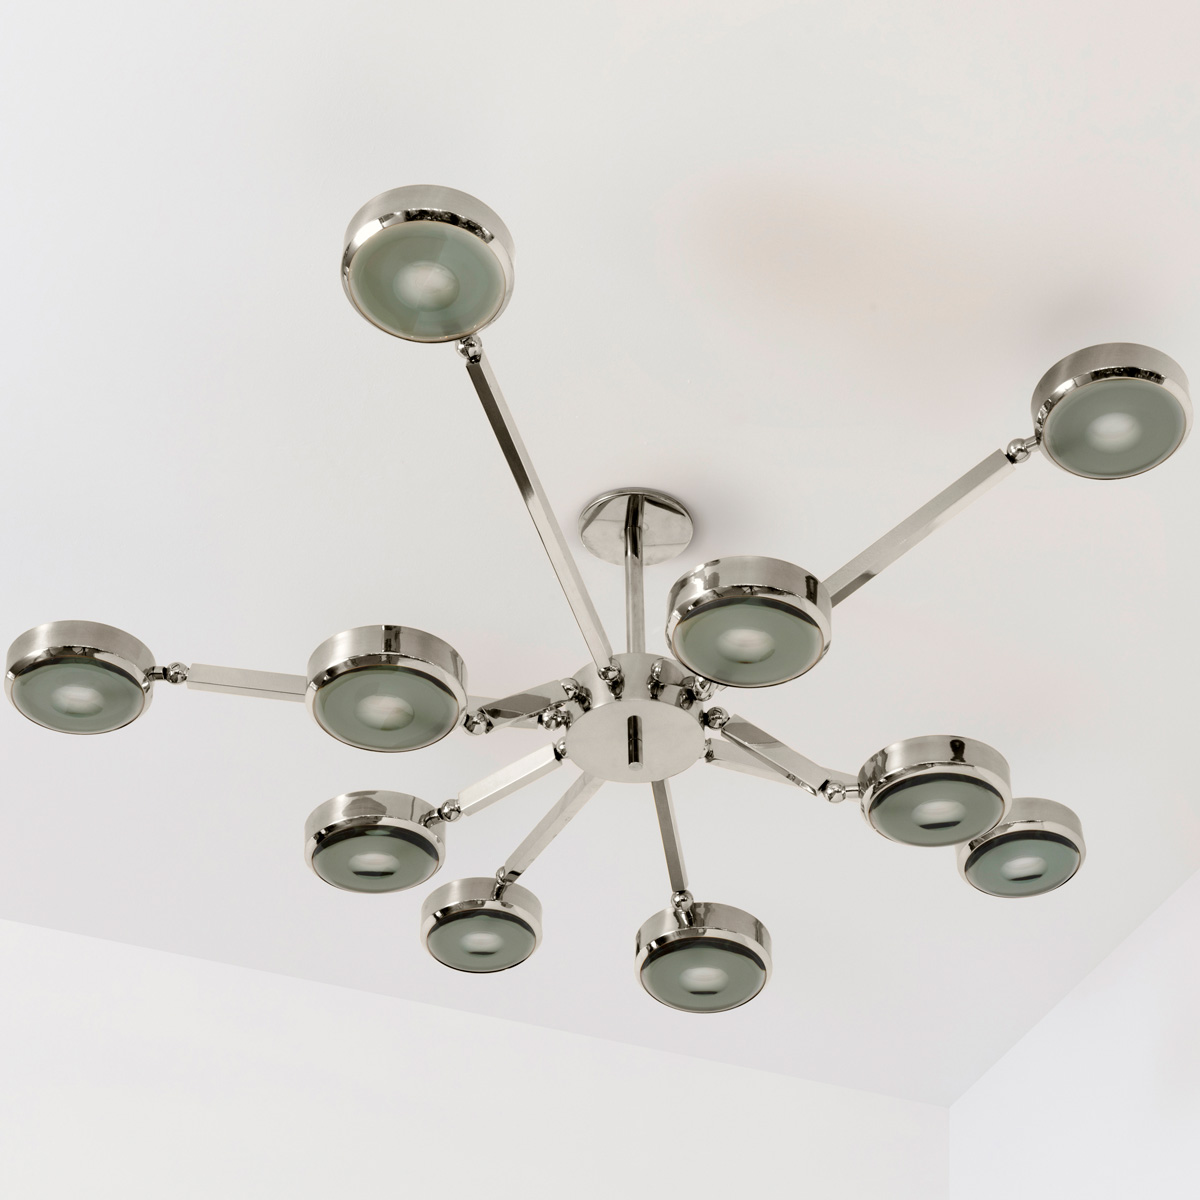 Oculus ceiling light by Gaspare Asaro